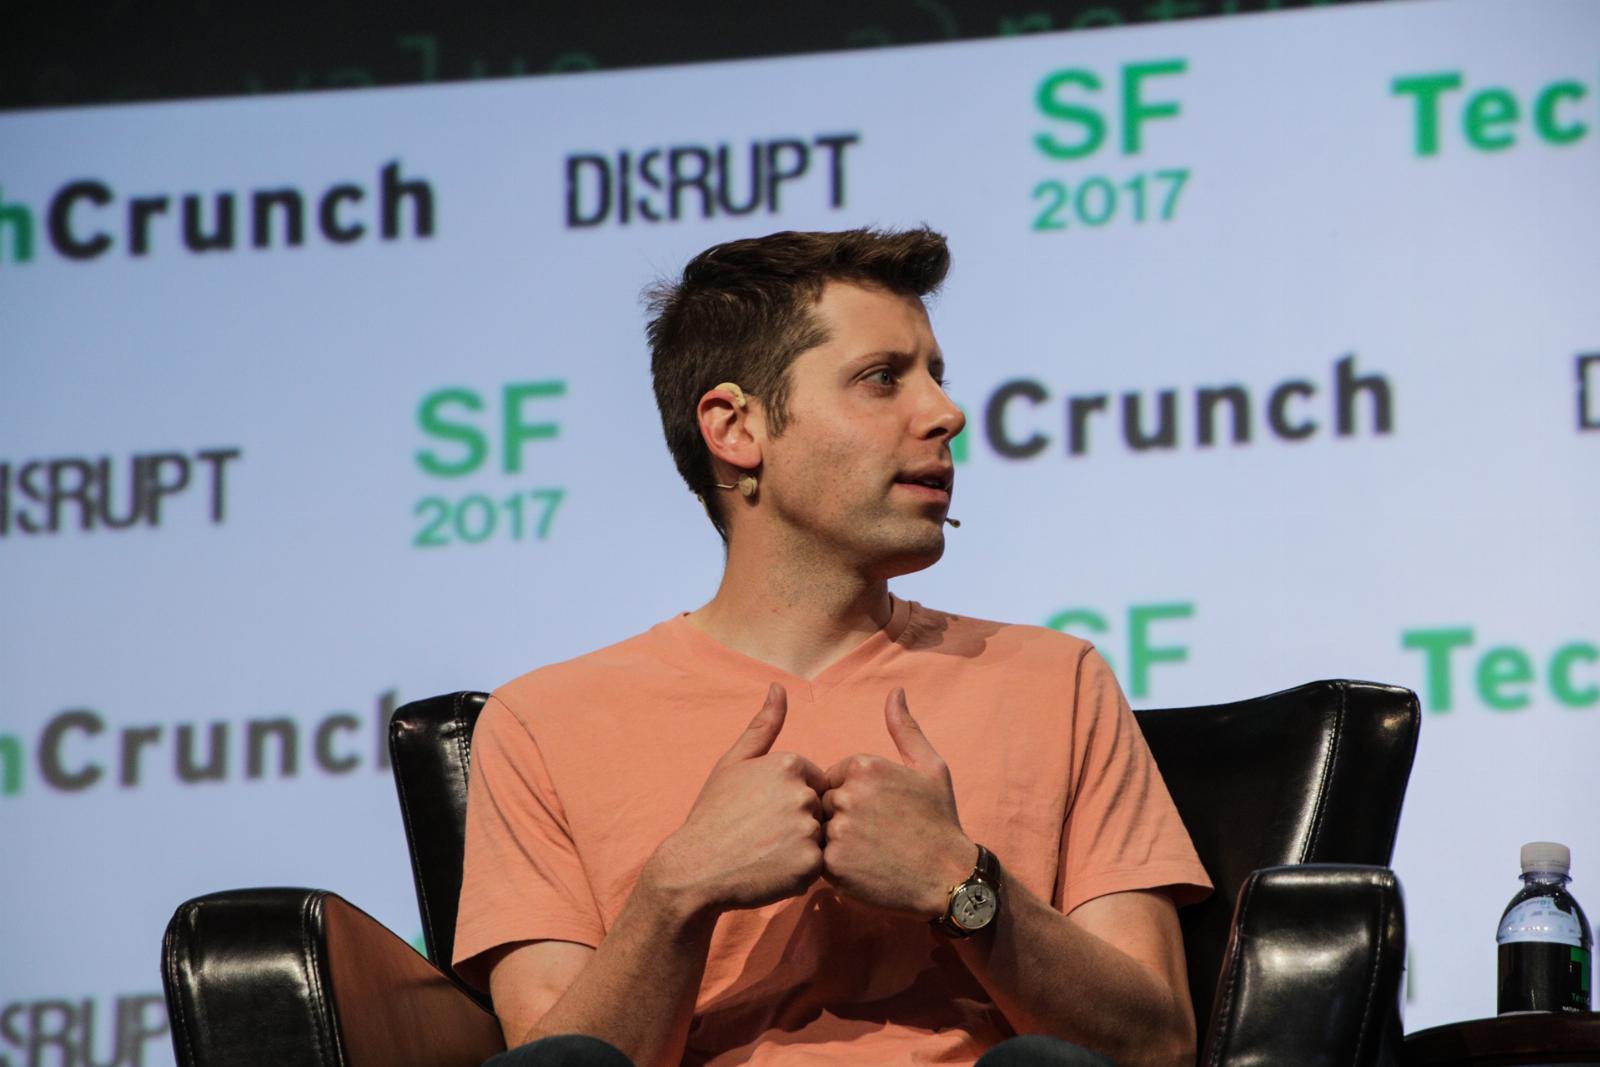 Sam Altman gives up control of OpenAI Startup Fund, resolving unusual corporate venture structure